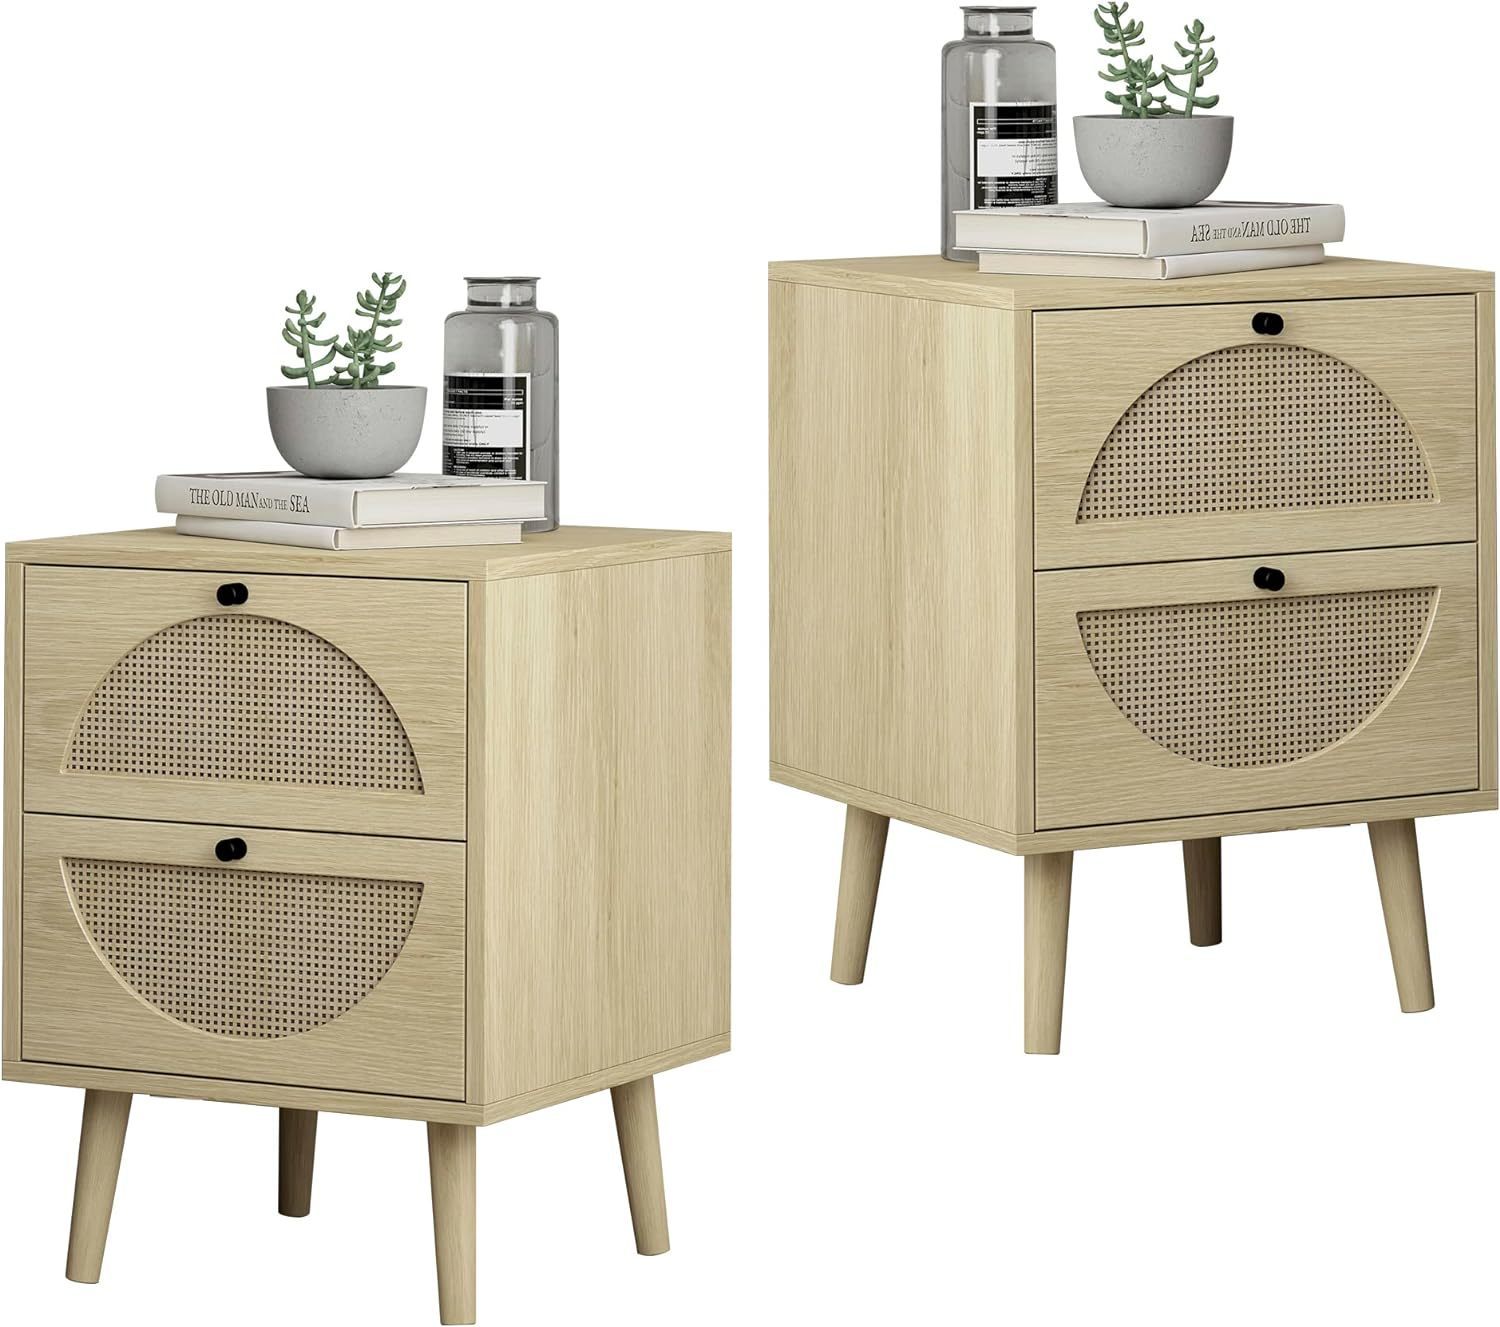 Set of 2 Nightstand End Tables with Rattan Drawers, Natural